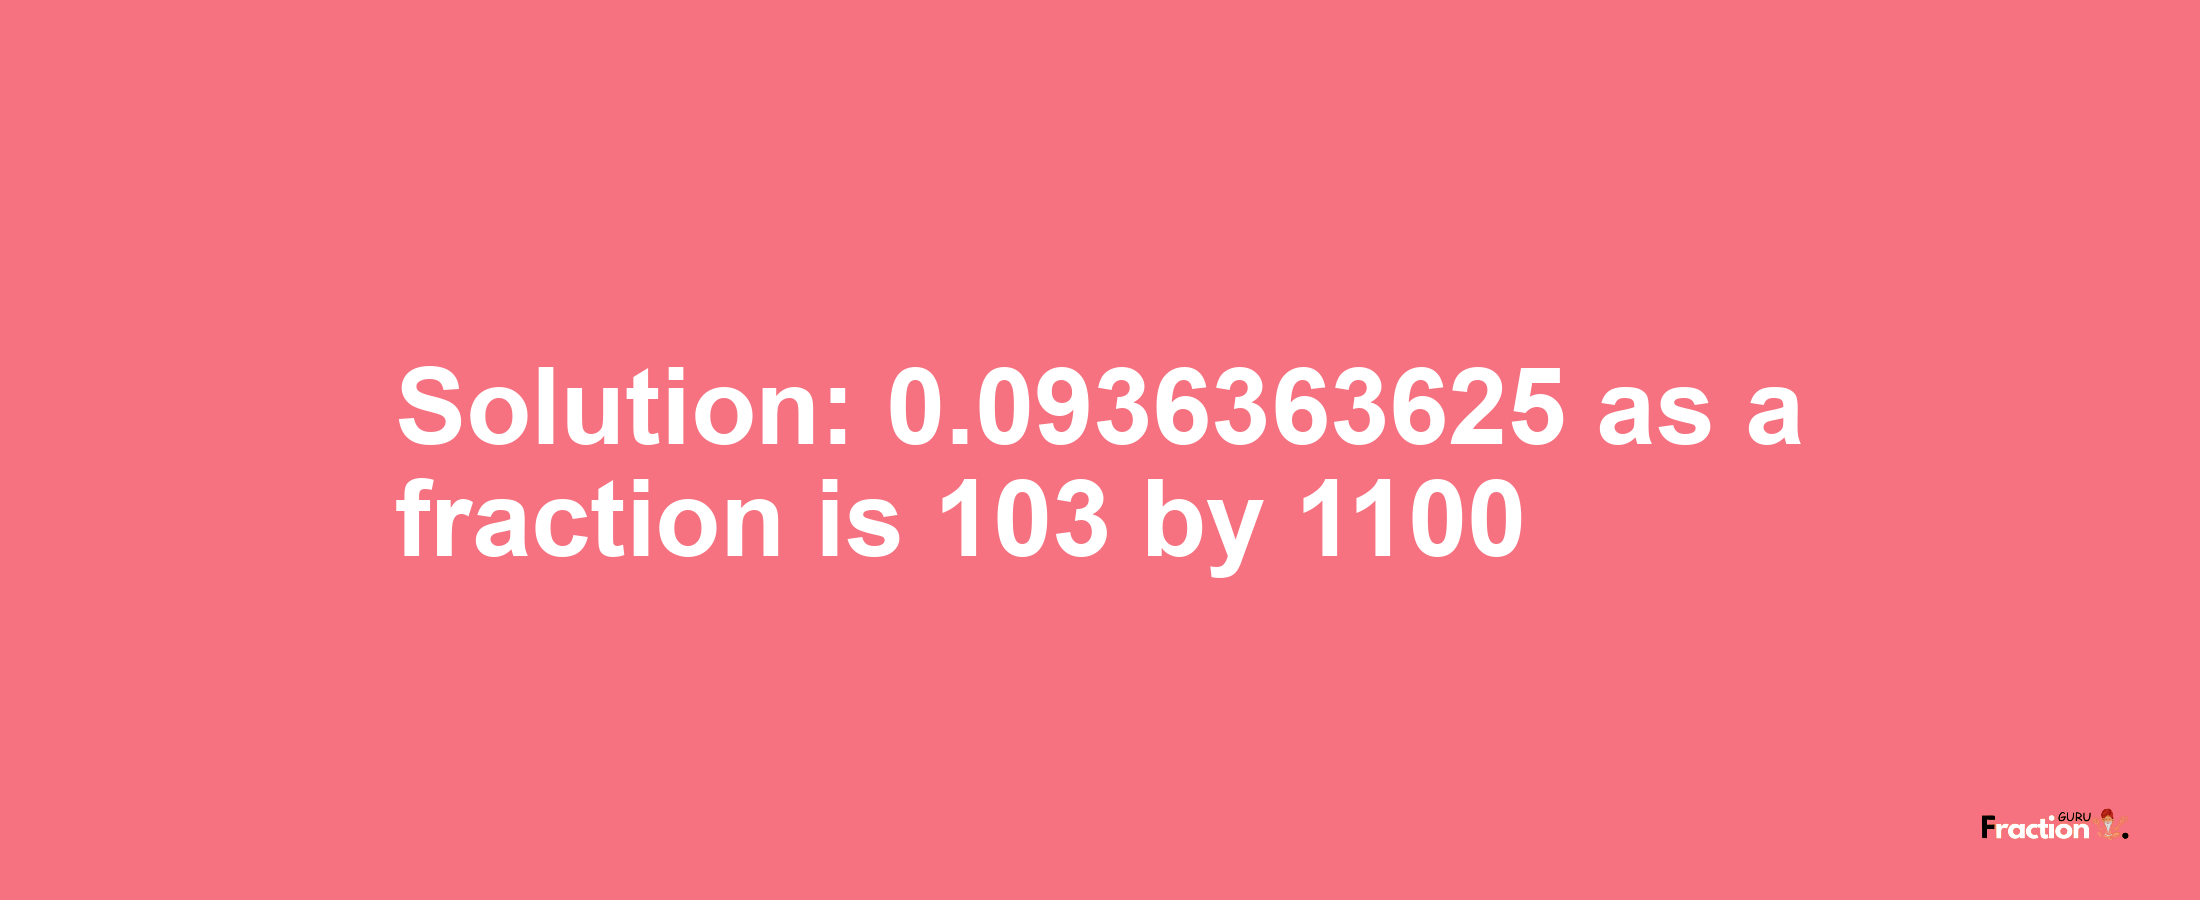 Solution:0.0936363625 as a fraction is 103/1100